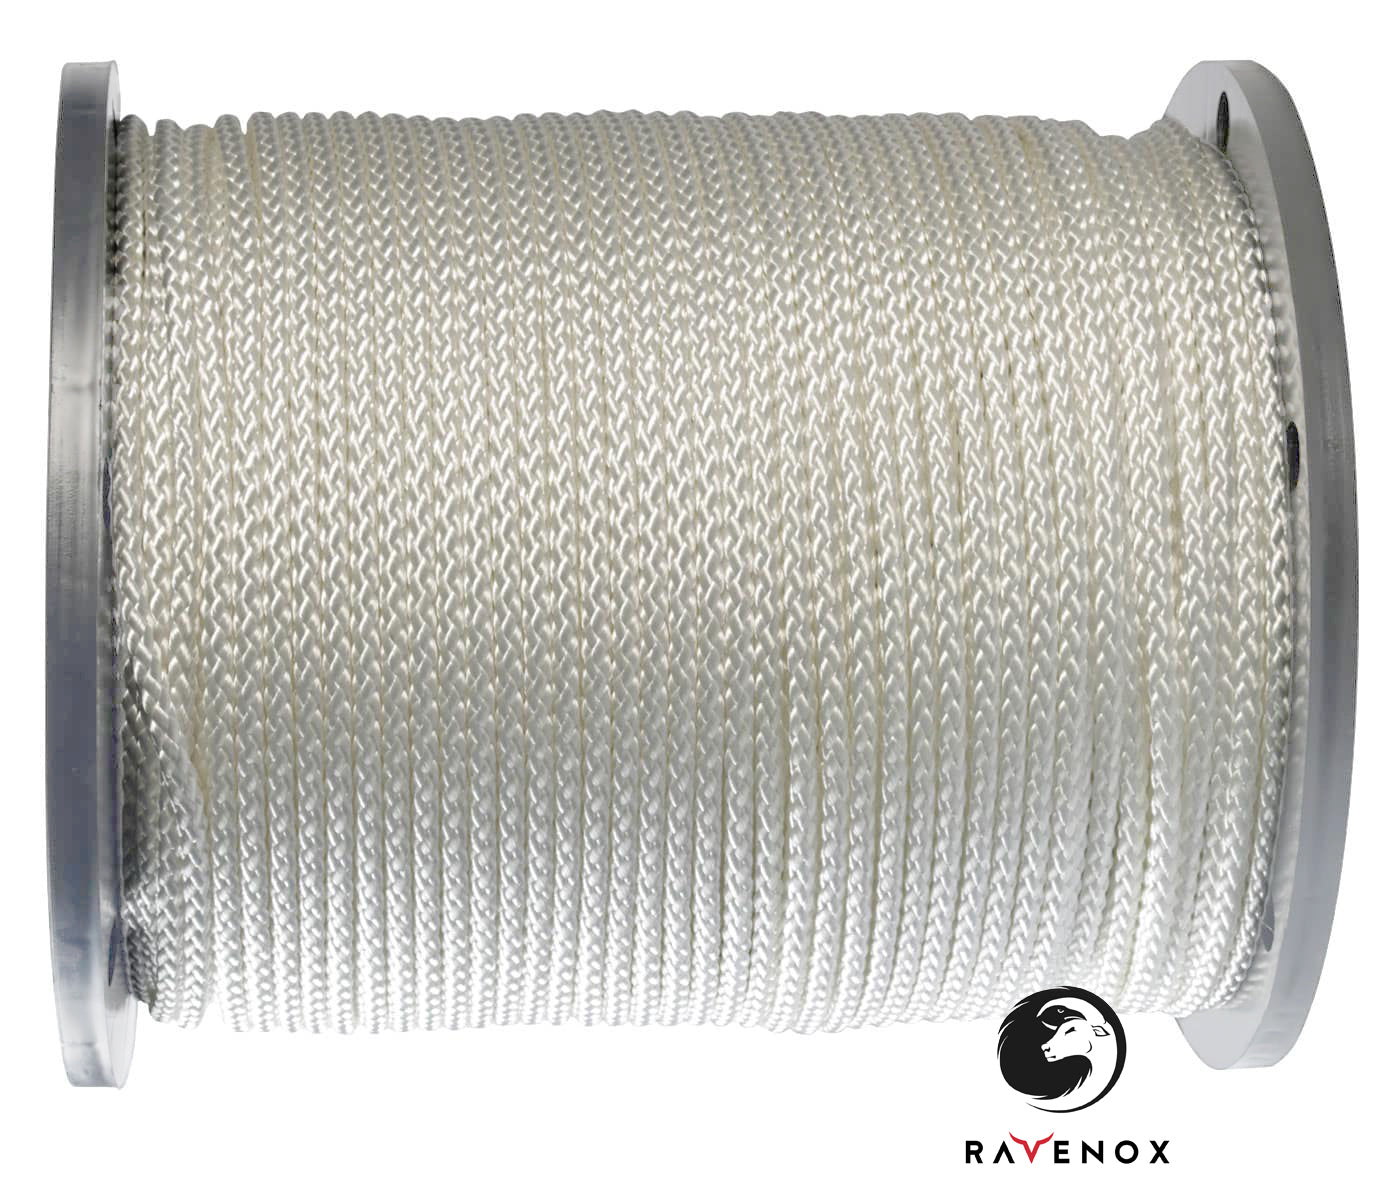 Ace Gold Twisted Nylon Twine - 18 in x 525 ft - Essex County Co-Op